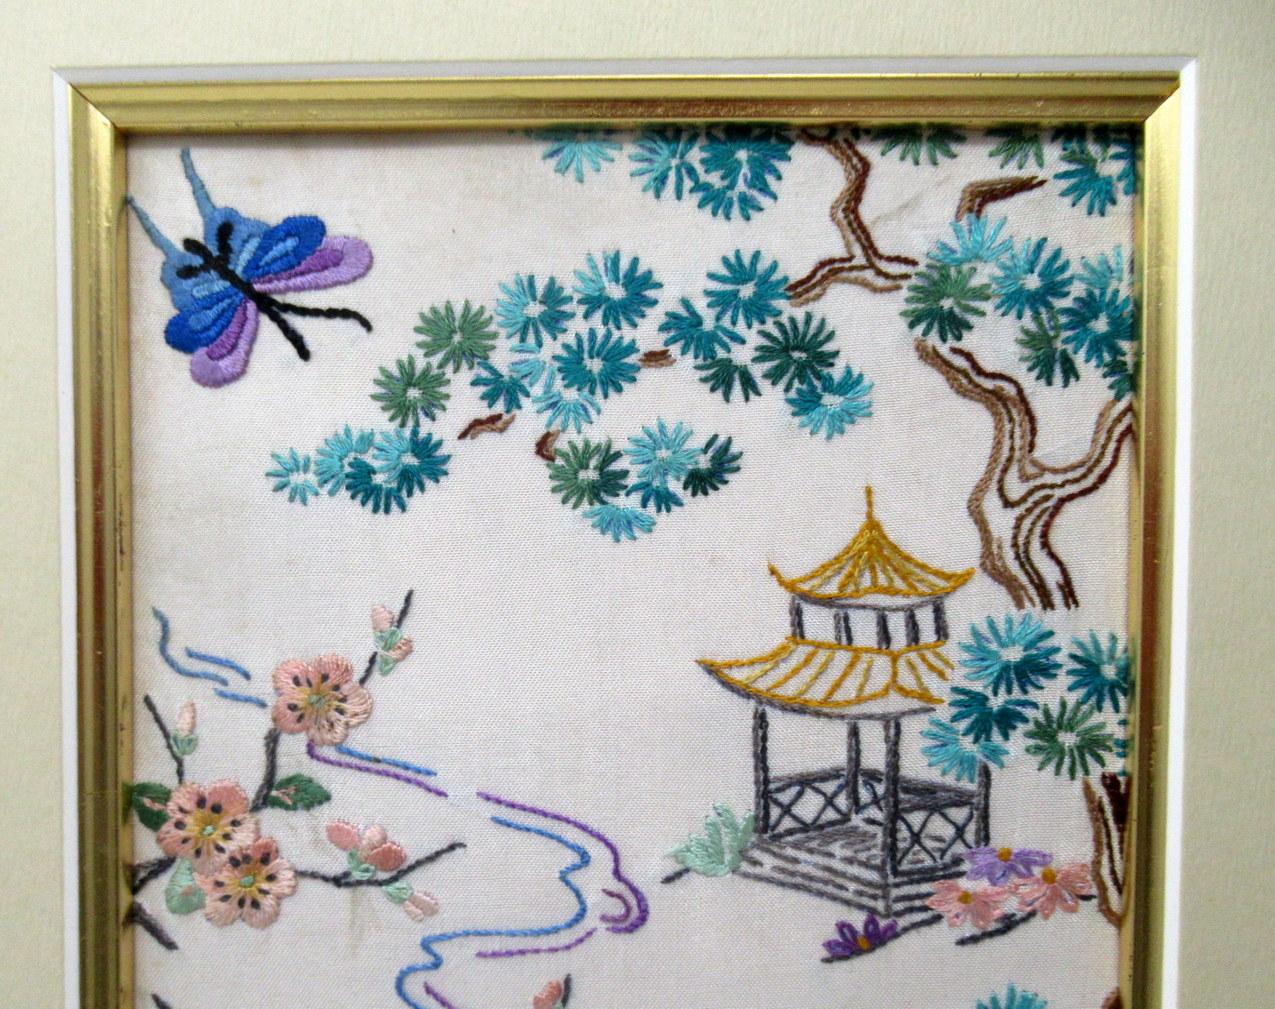 19th Century Antique Pair of Chinese Hand Embroidered Silk Pictures Panels Irish Interest